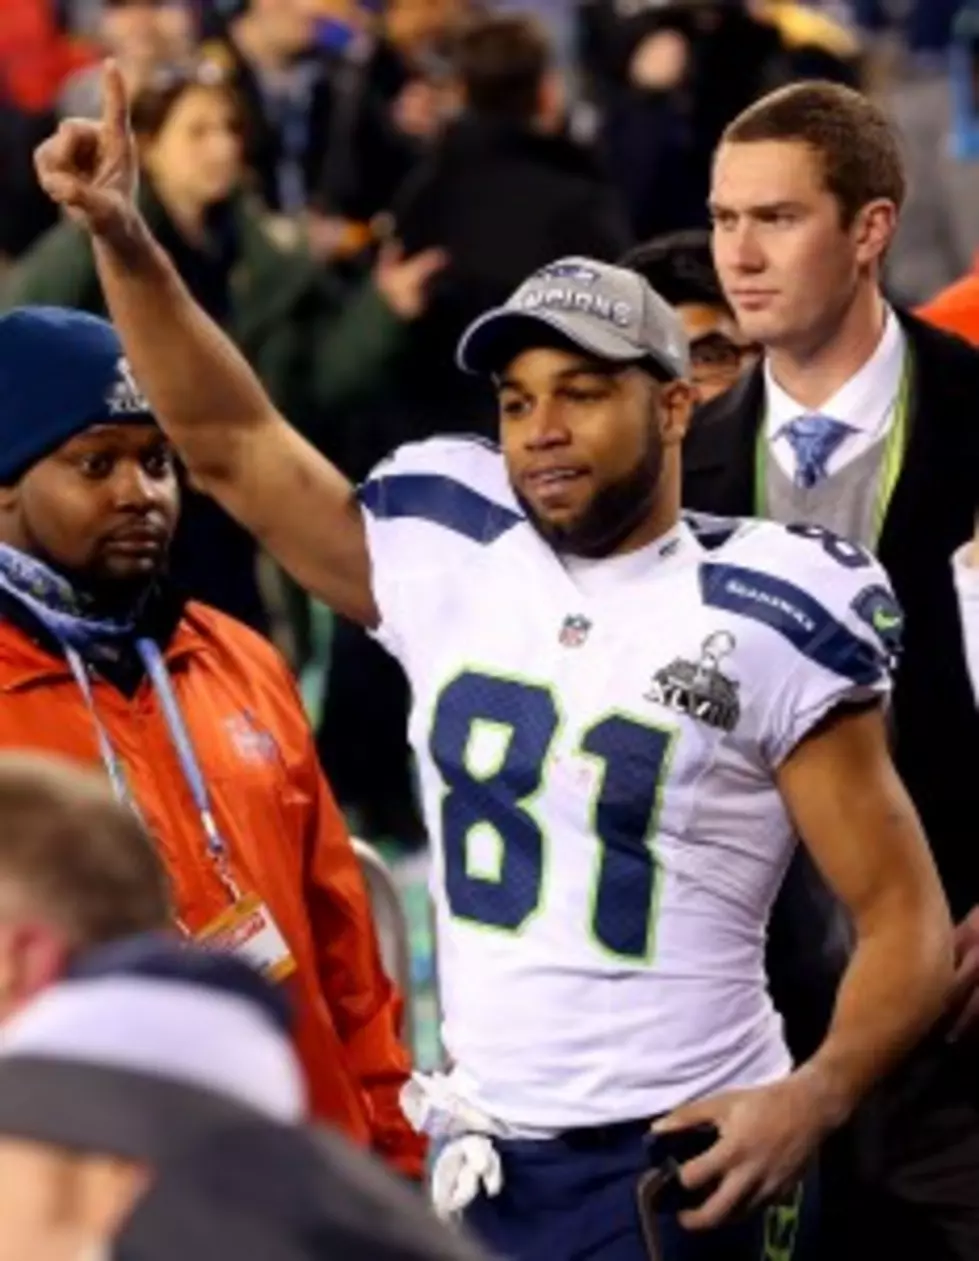 Tim Staudt Commentary: Detroit Lions&#8217; Signing of Golden Tate